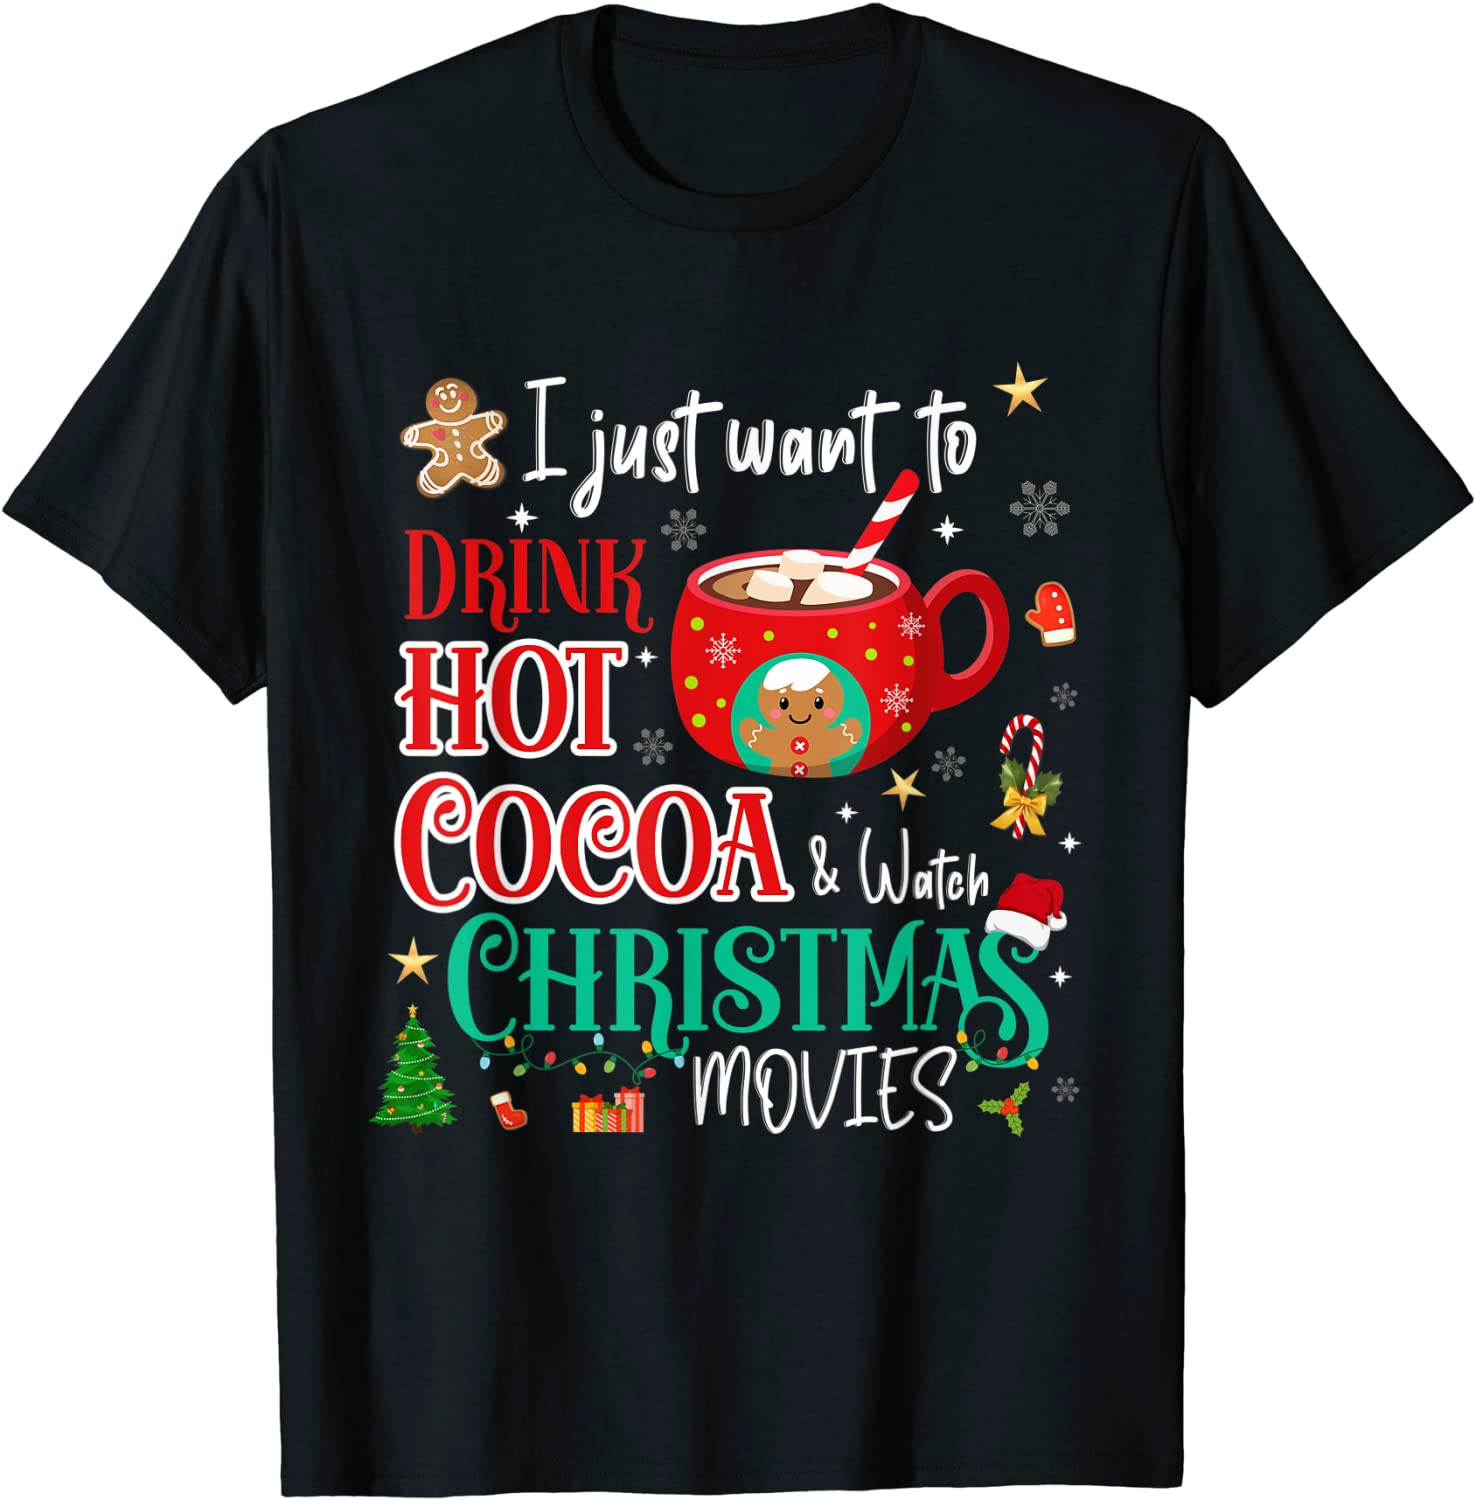 I Just Want To Drink Hot Cocoa And Watch Christmas Movies T-Shirt